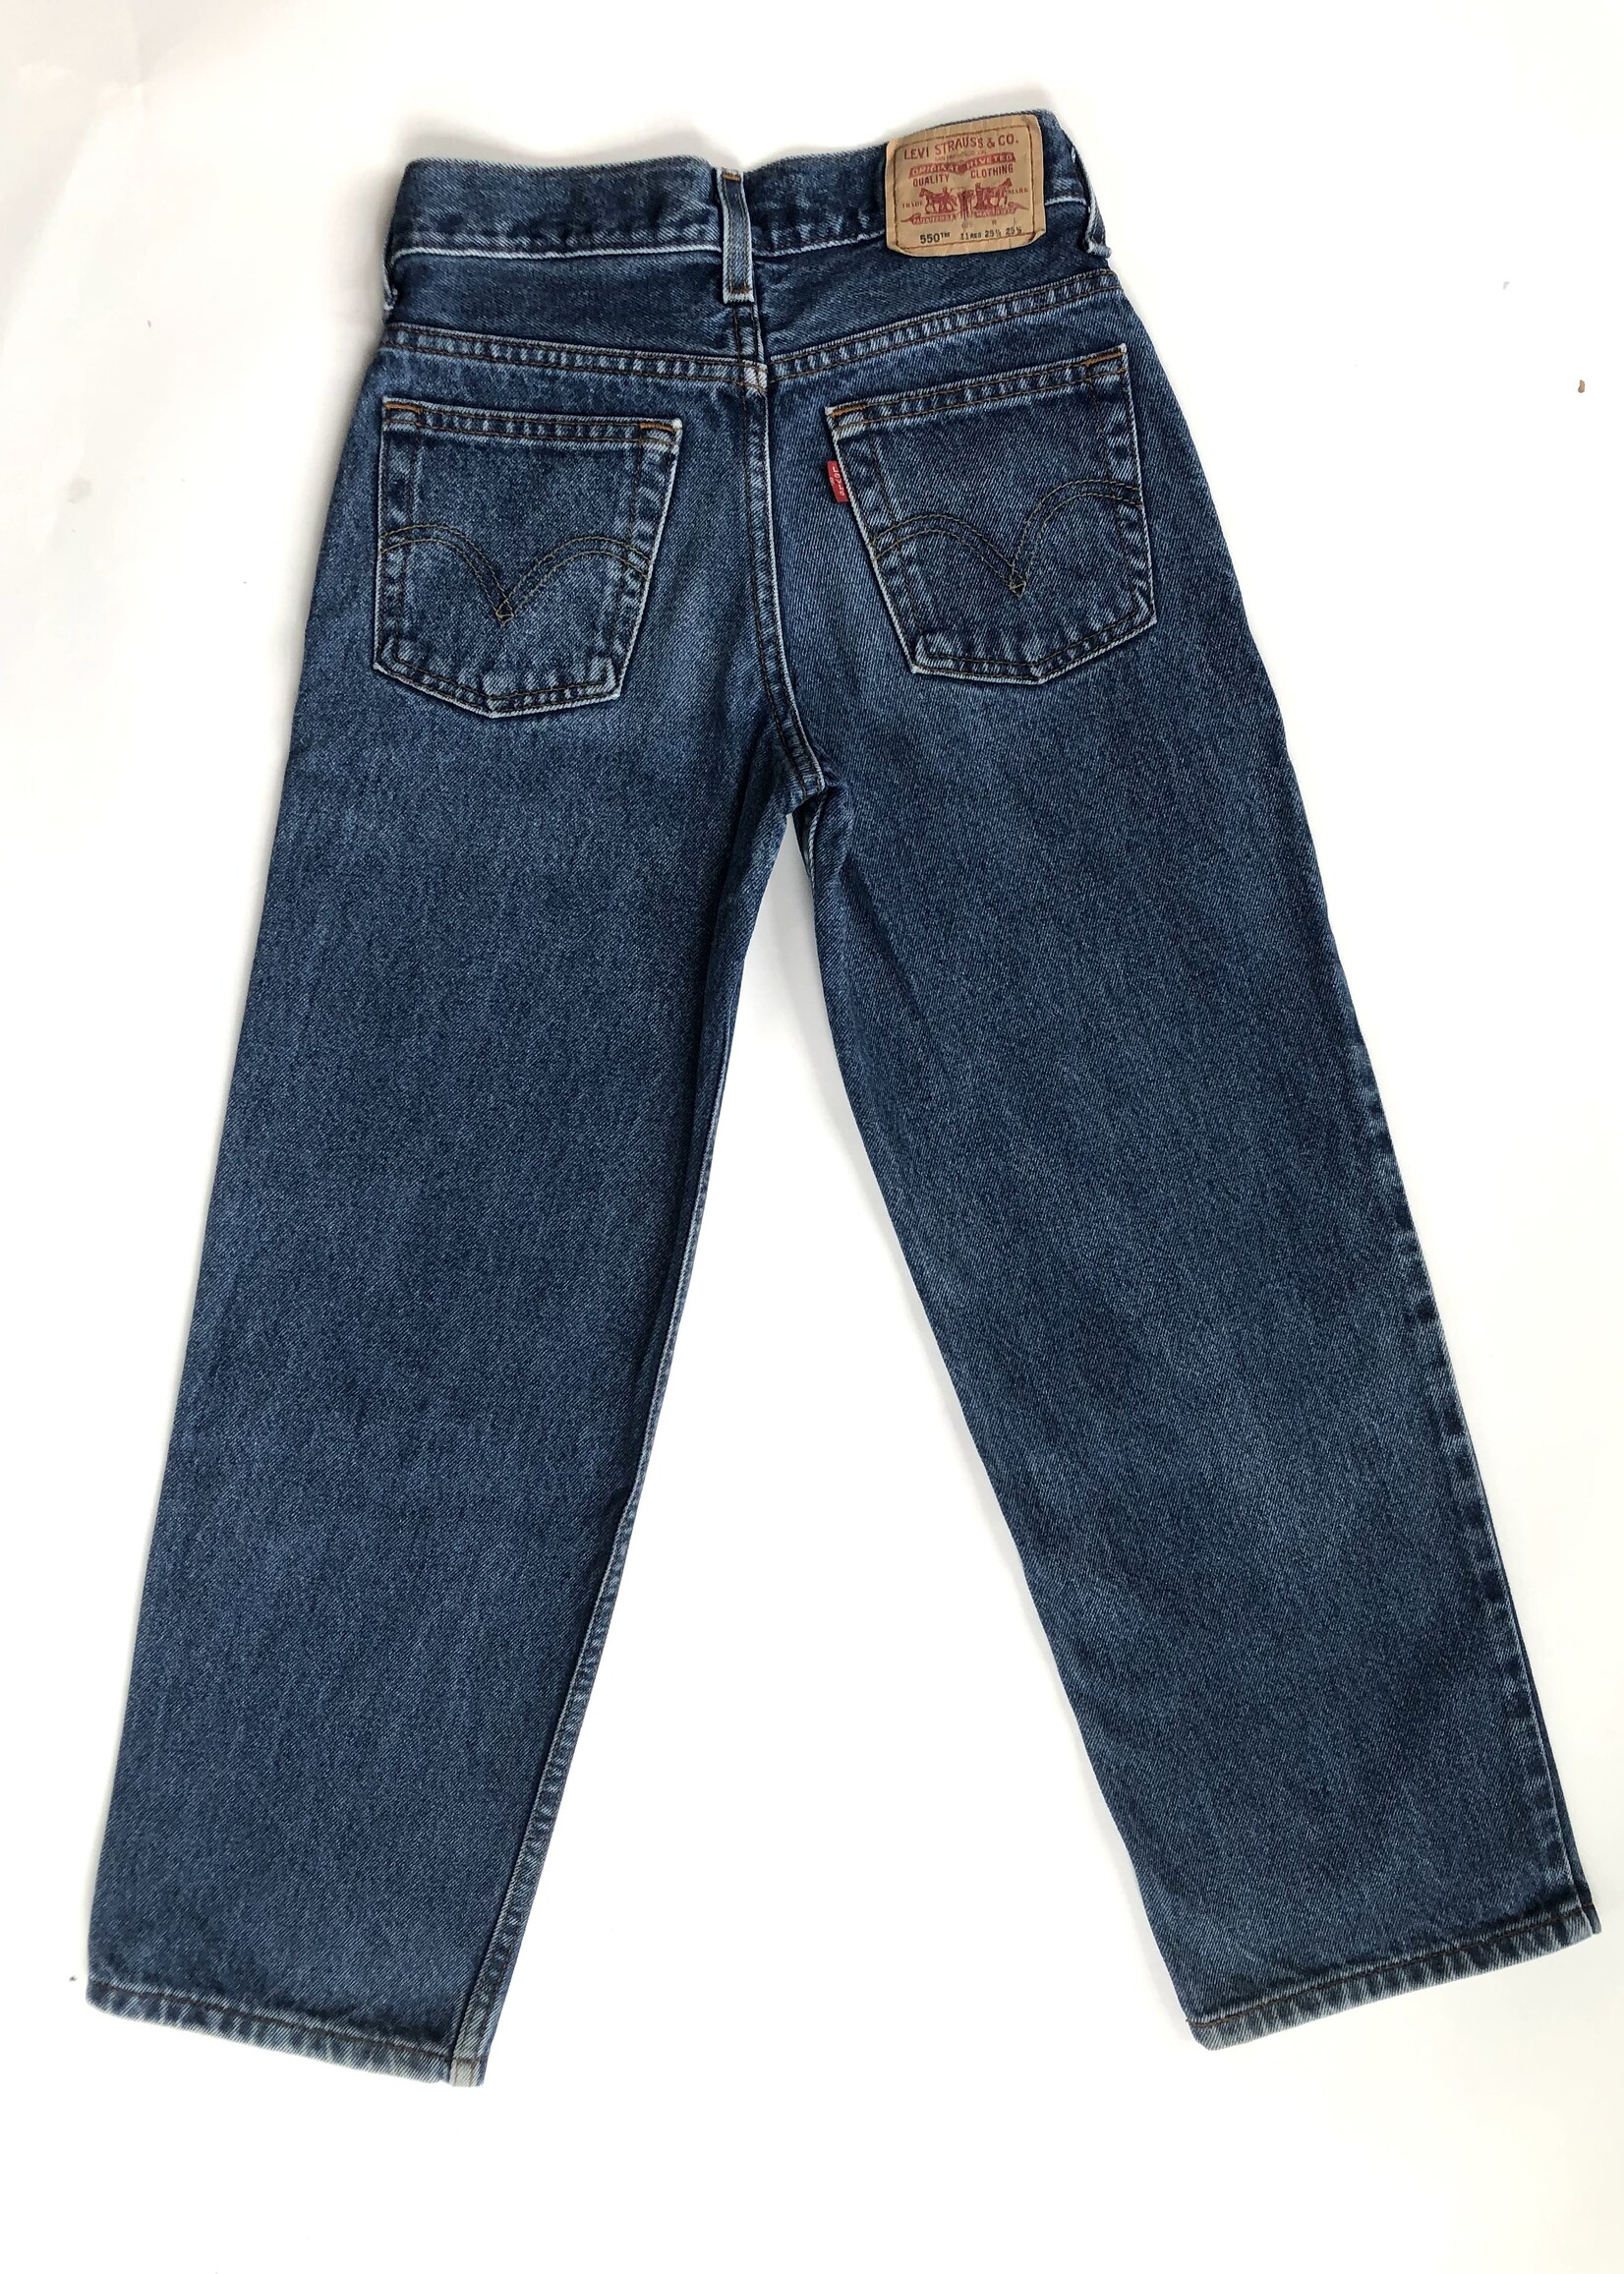 Levi's 550 Relaxed Fit jeans 10y